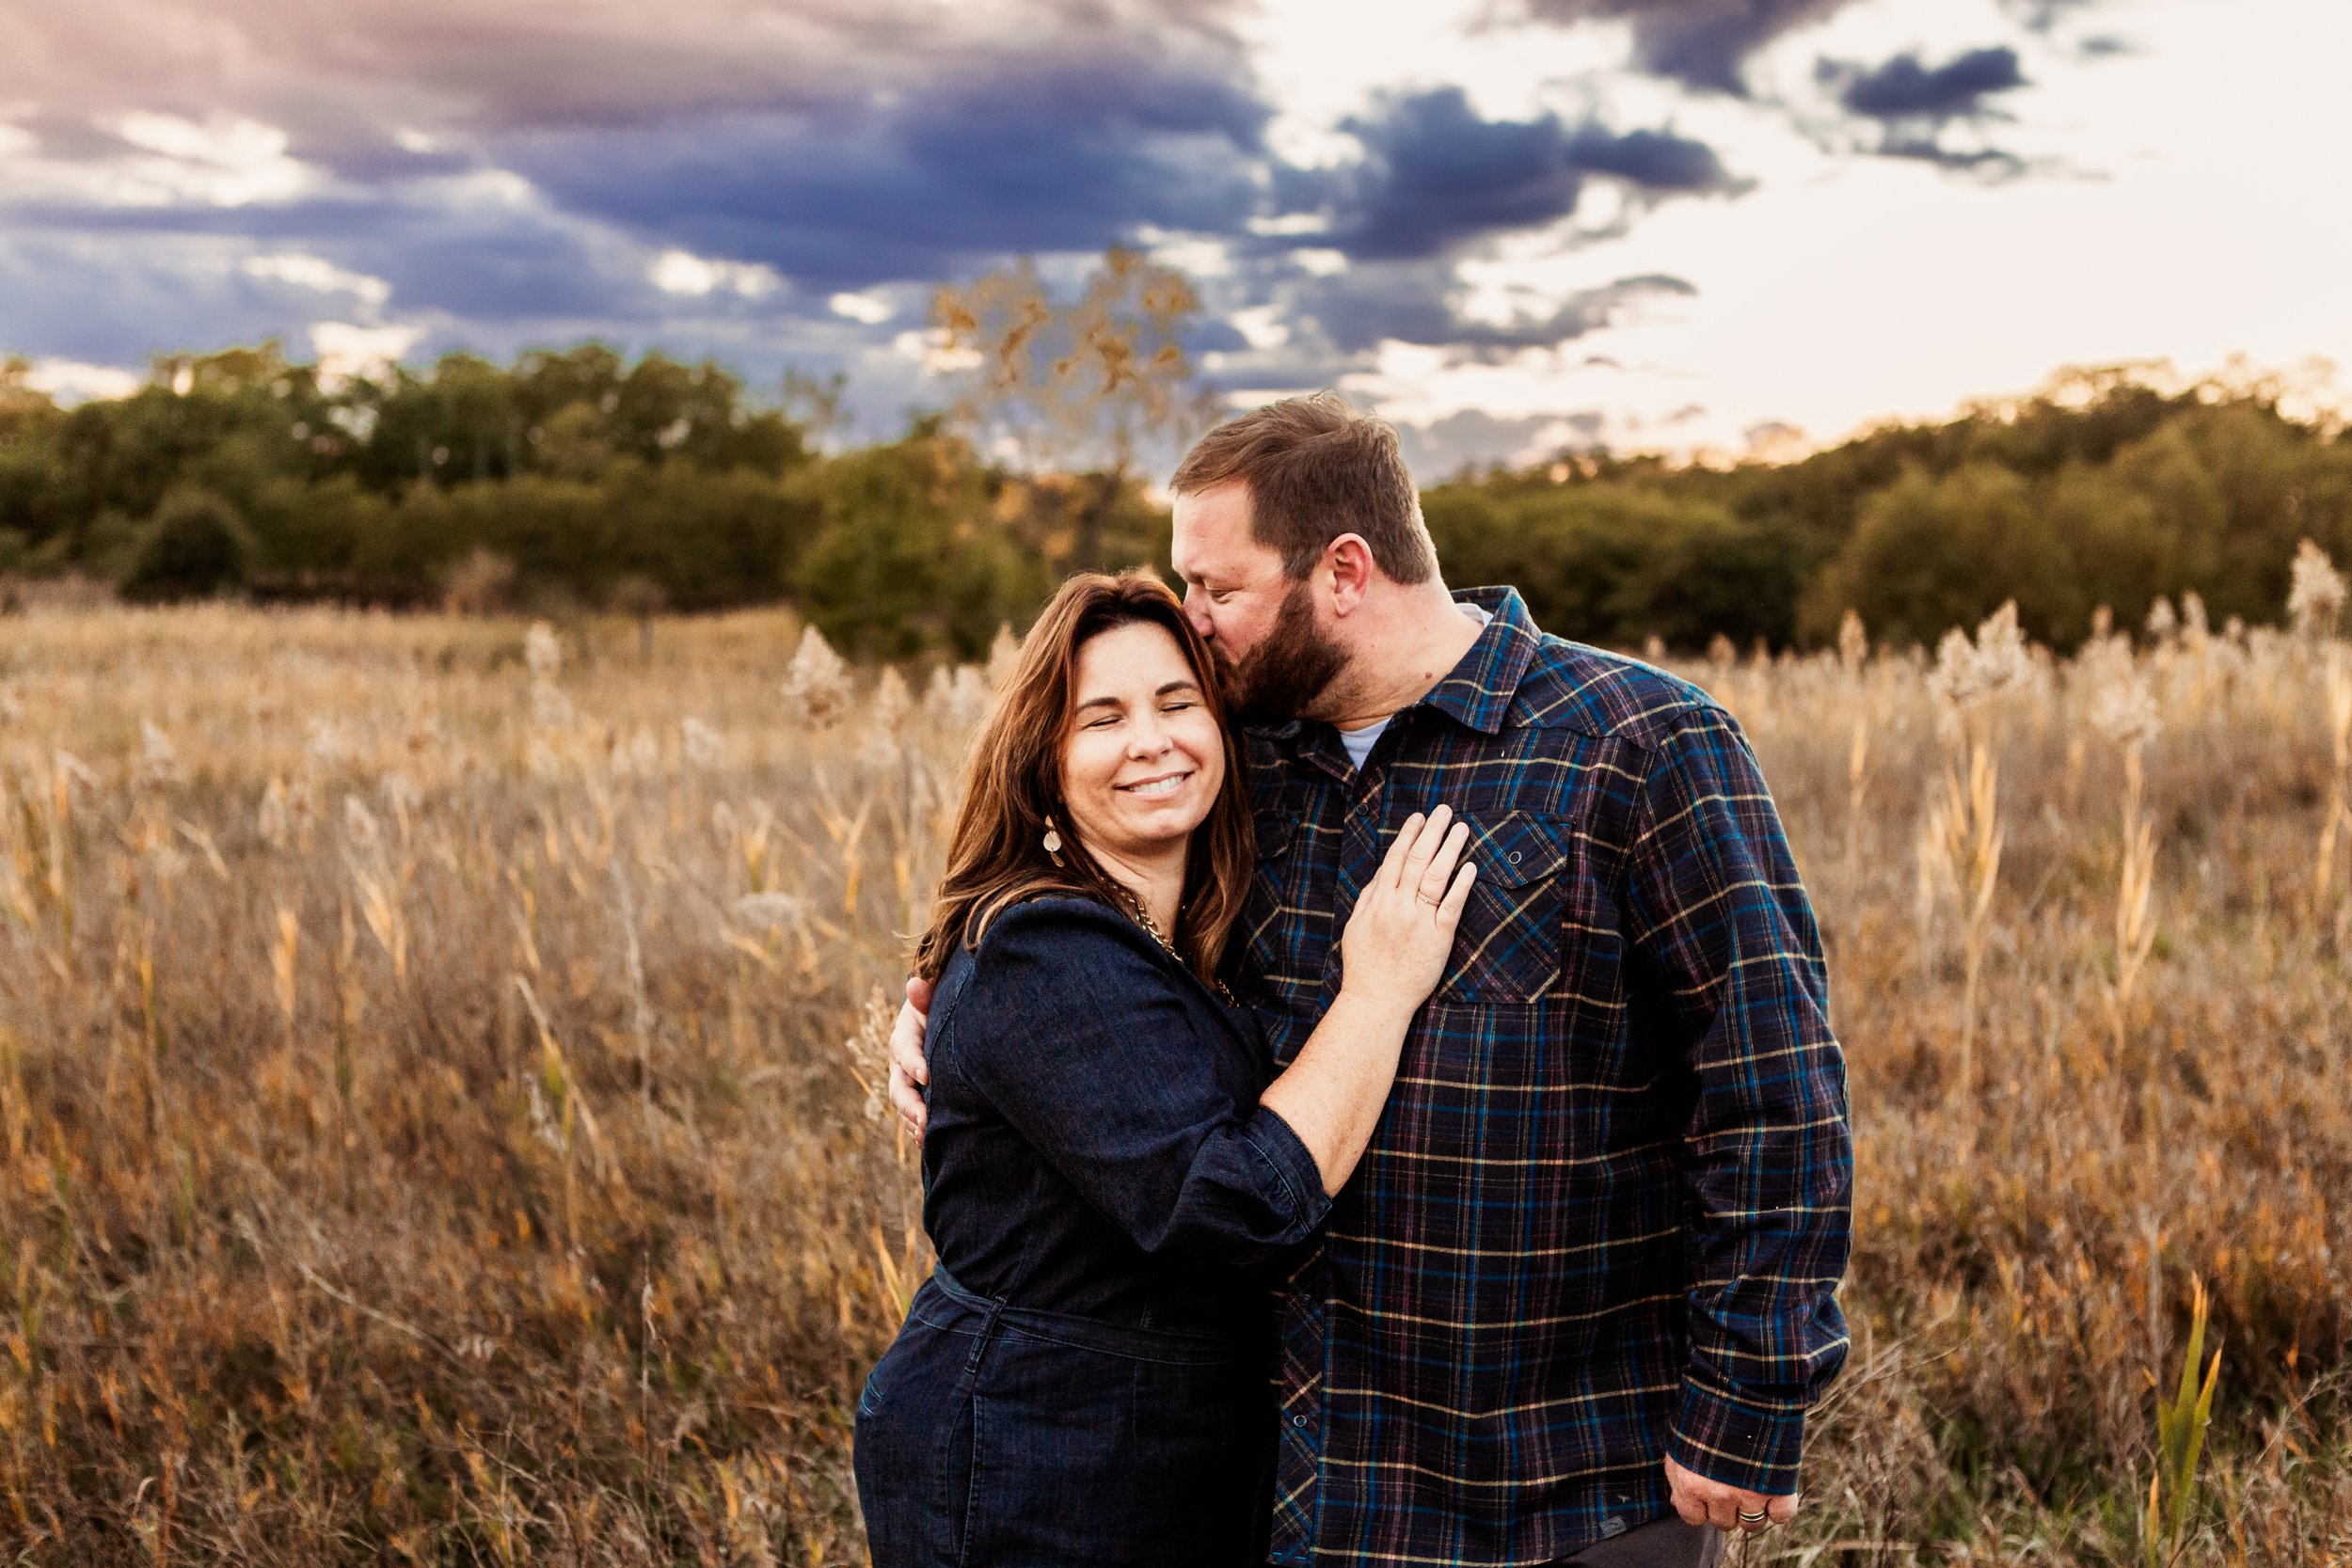  Teala Ward Photography captures a husband kissing his wife on the head while she snuggles close. couple portraits inspiration #TealaWardPhotography #TealaWardFamilies #photographers #IllinoisPhotographer #ILphotographers #IllinoisValleyFamilies 